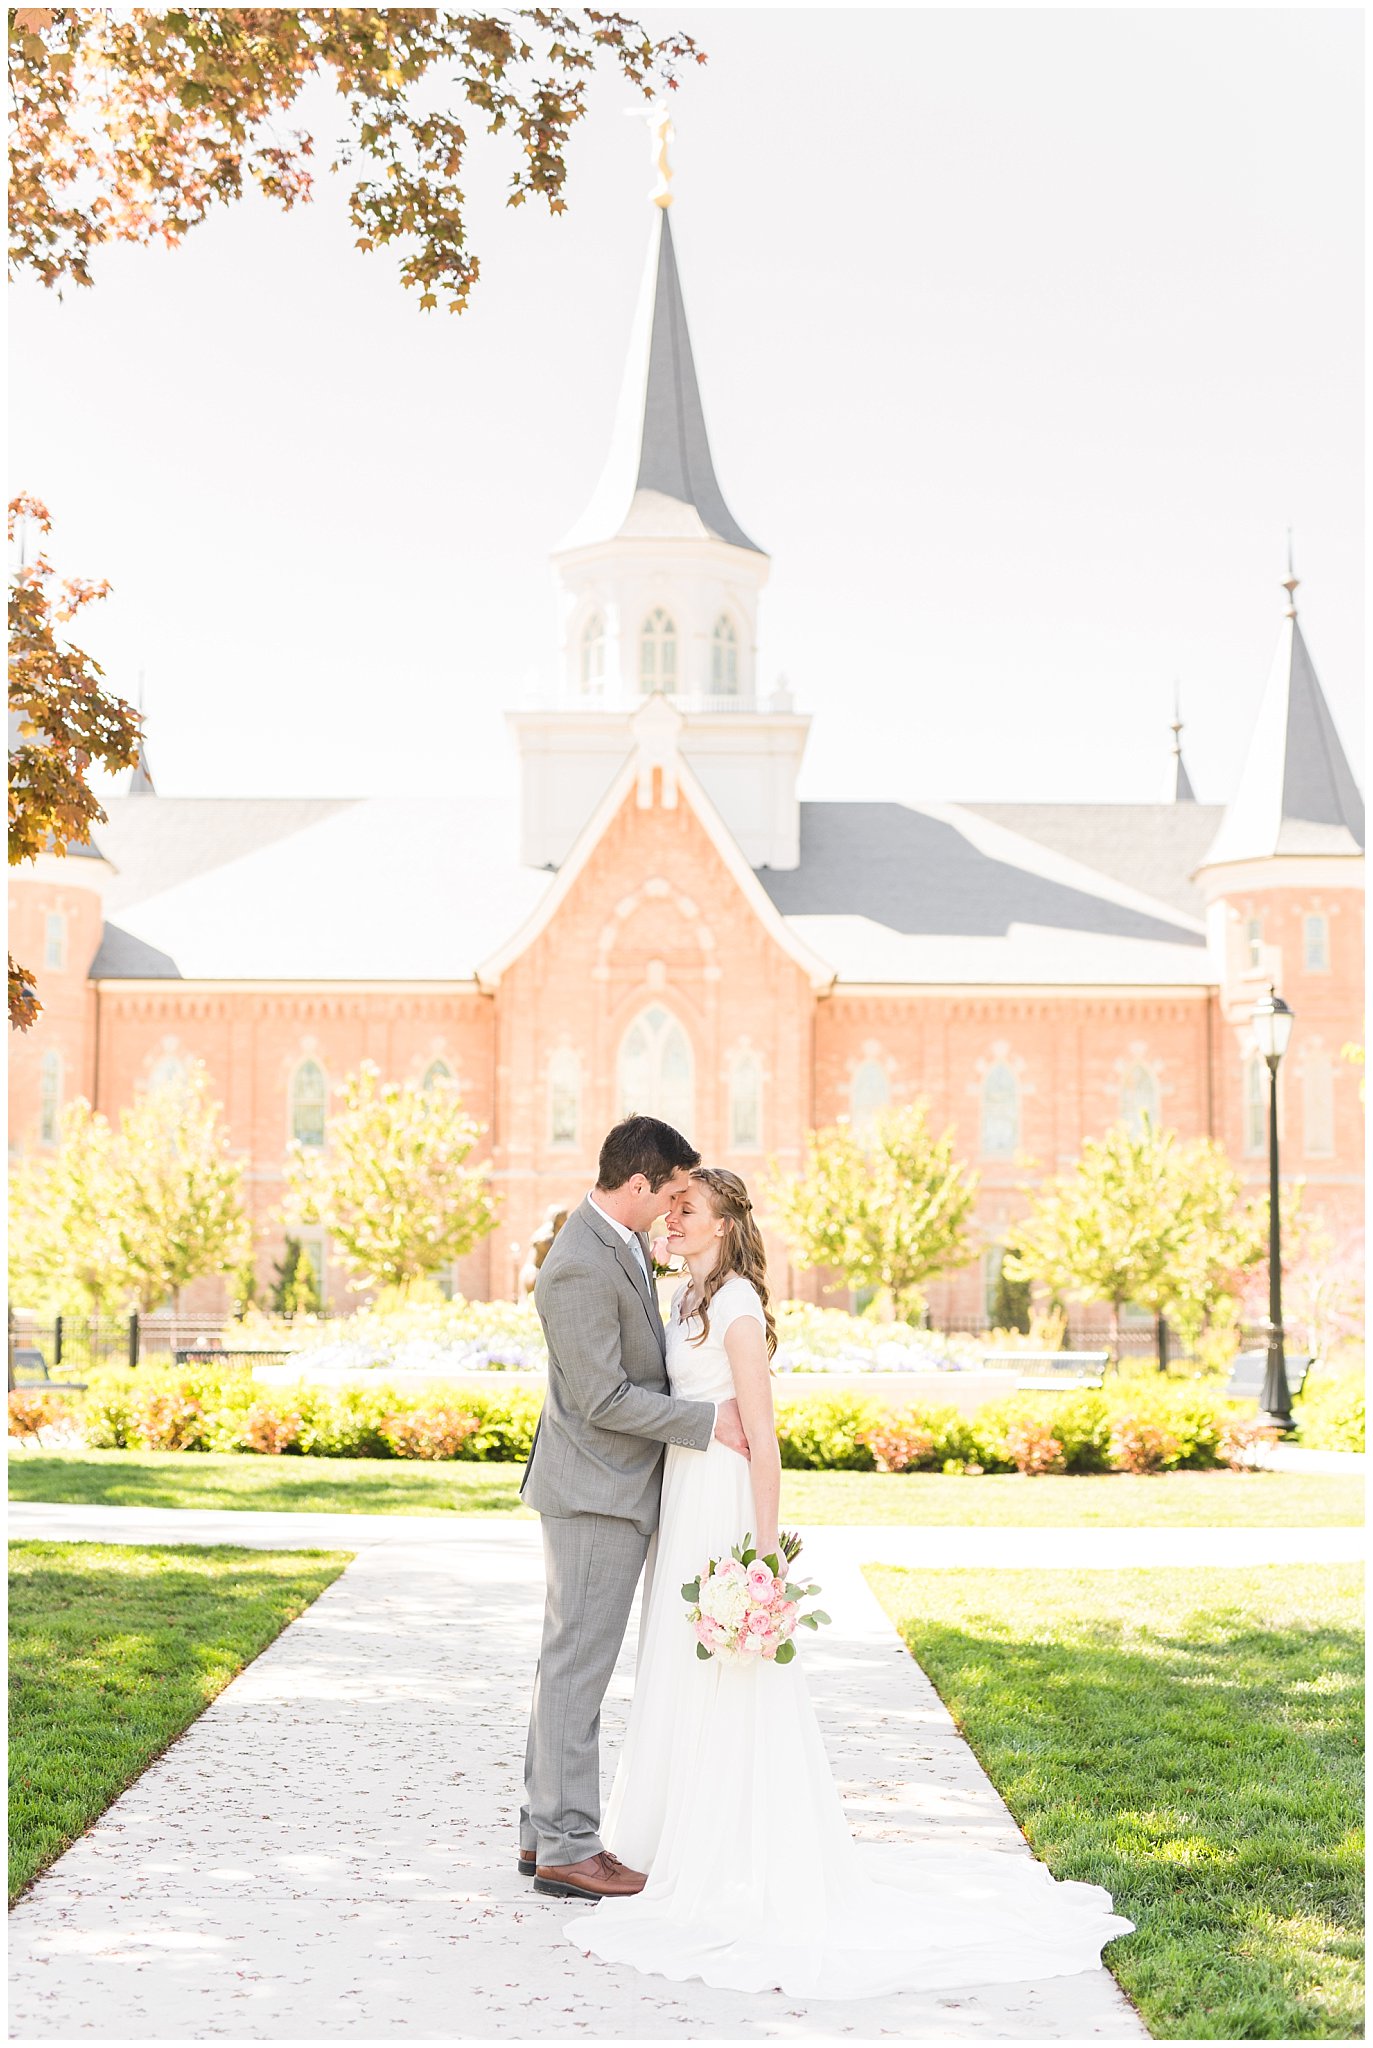 Bride and groom in front of the Provo City Center Temple on their wedding day | Top Utah Wedding and Couples Photos 2019 | Jessie and Dallin Photography